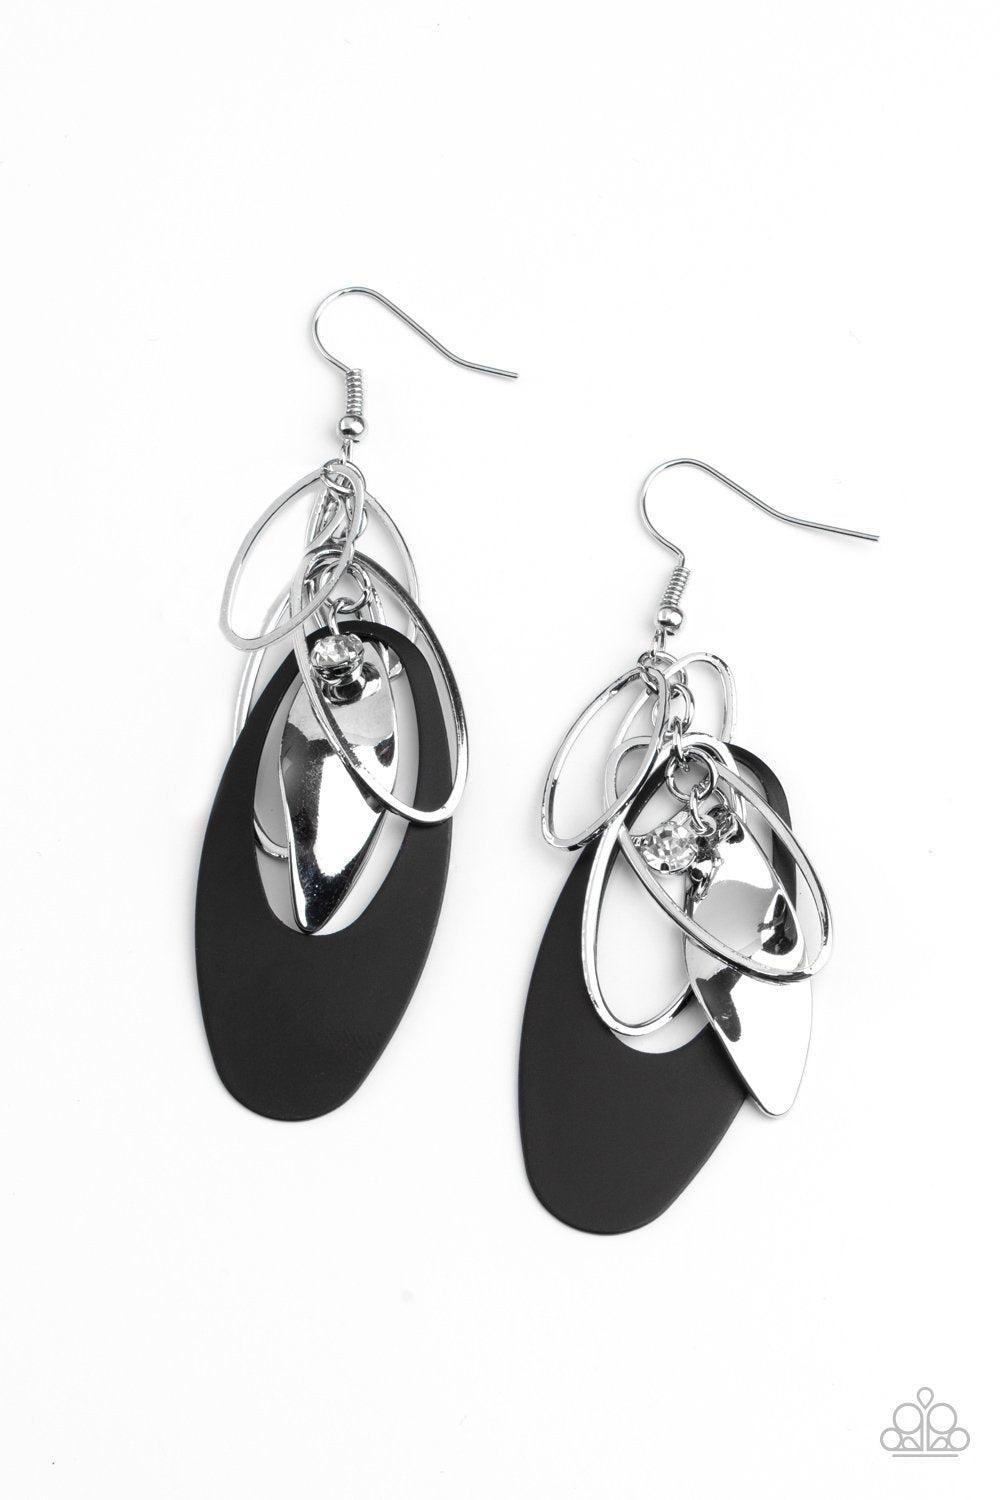 Ambitious Allure Black and Silver Earrings - Paparazzi Accessories- lightbox - CarasShop.com - $5 Jewelry by Cara Jewels